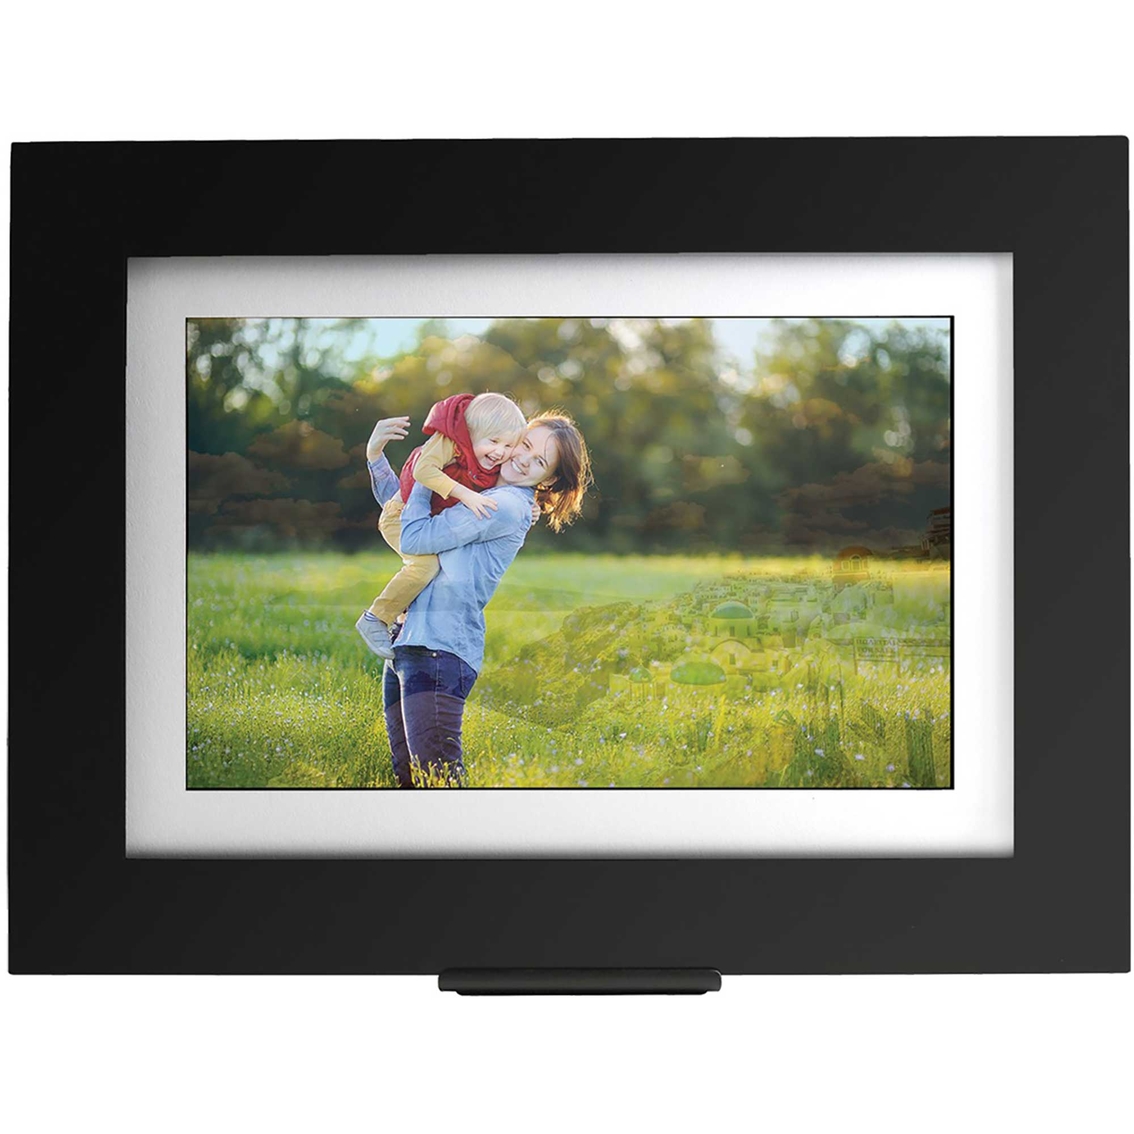 Brookstone Switchmate PhotoShare Friends and Family Cloud Frame 8 in. - Image 2 of 6